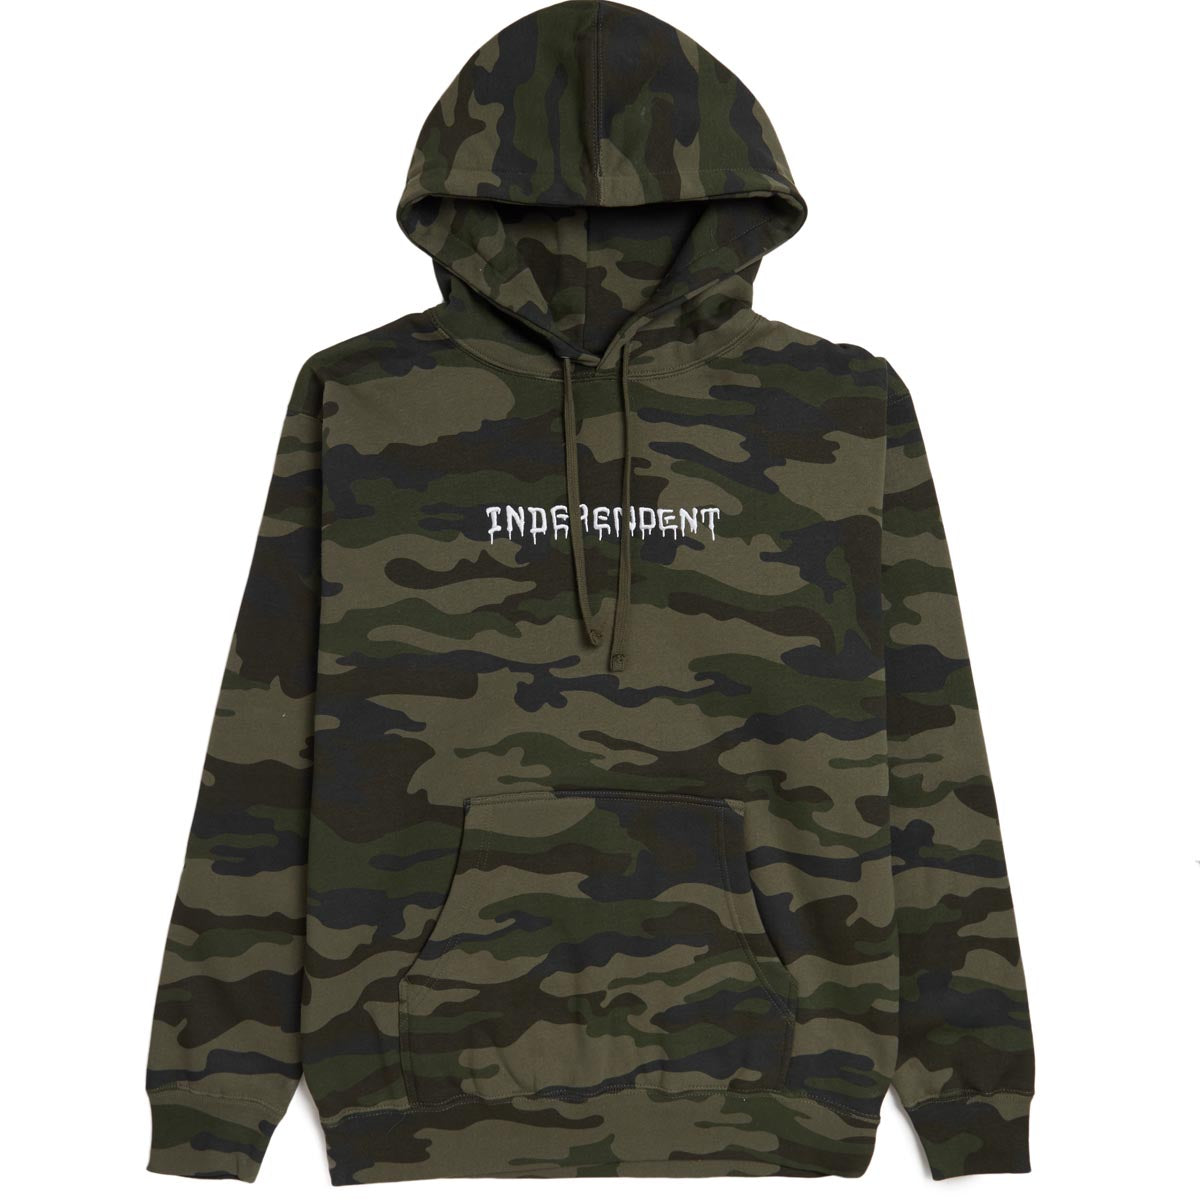 Independent Vandal Hoodie - Forest Camo image 1